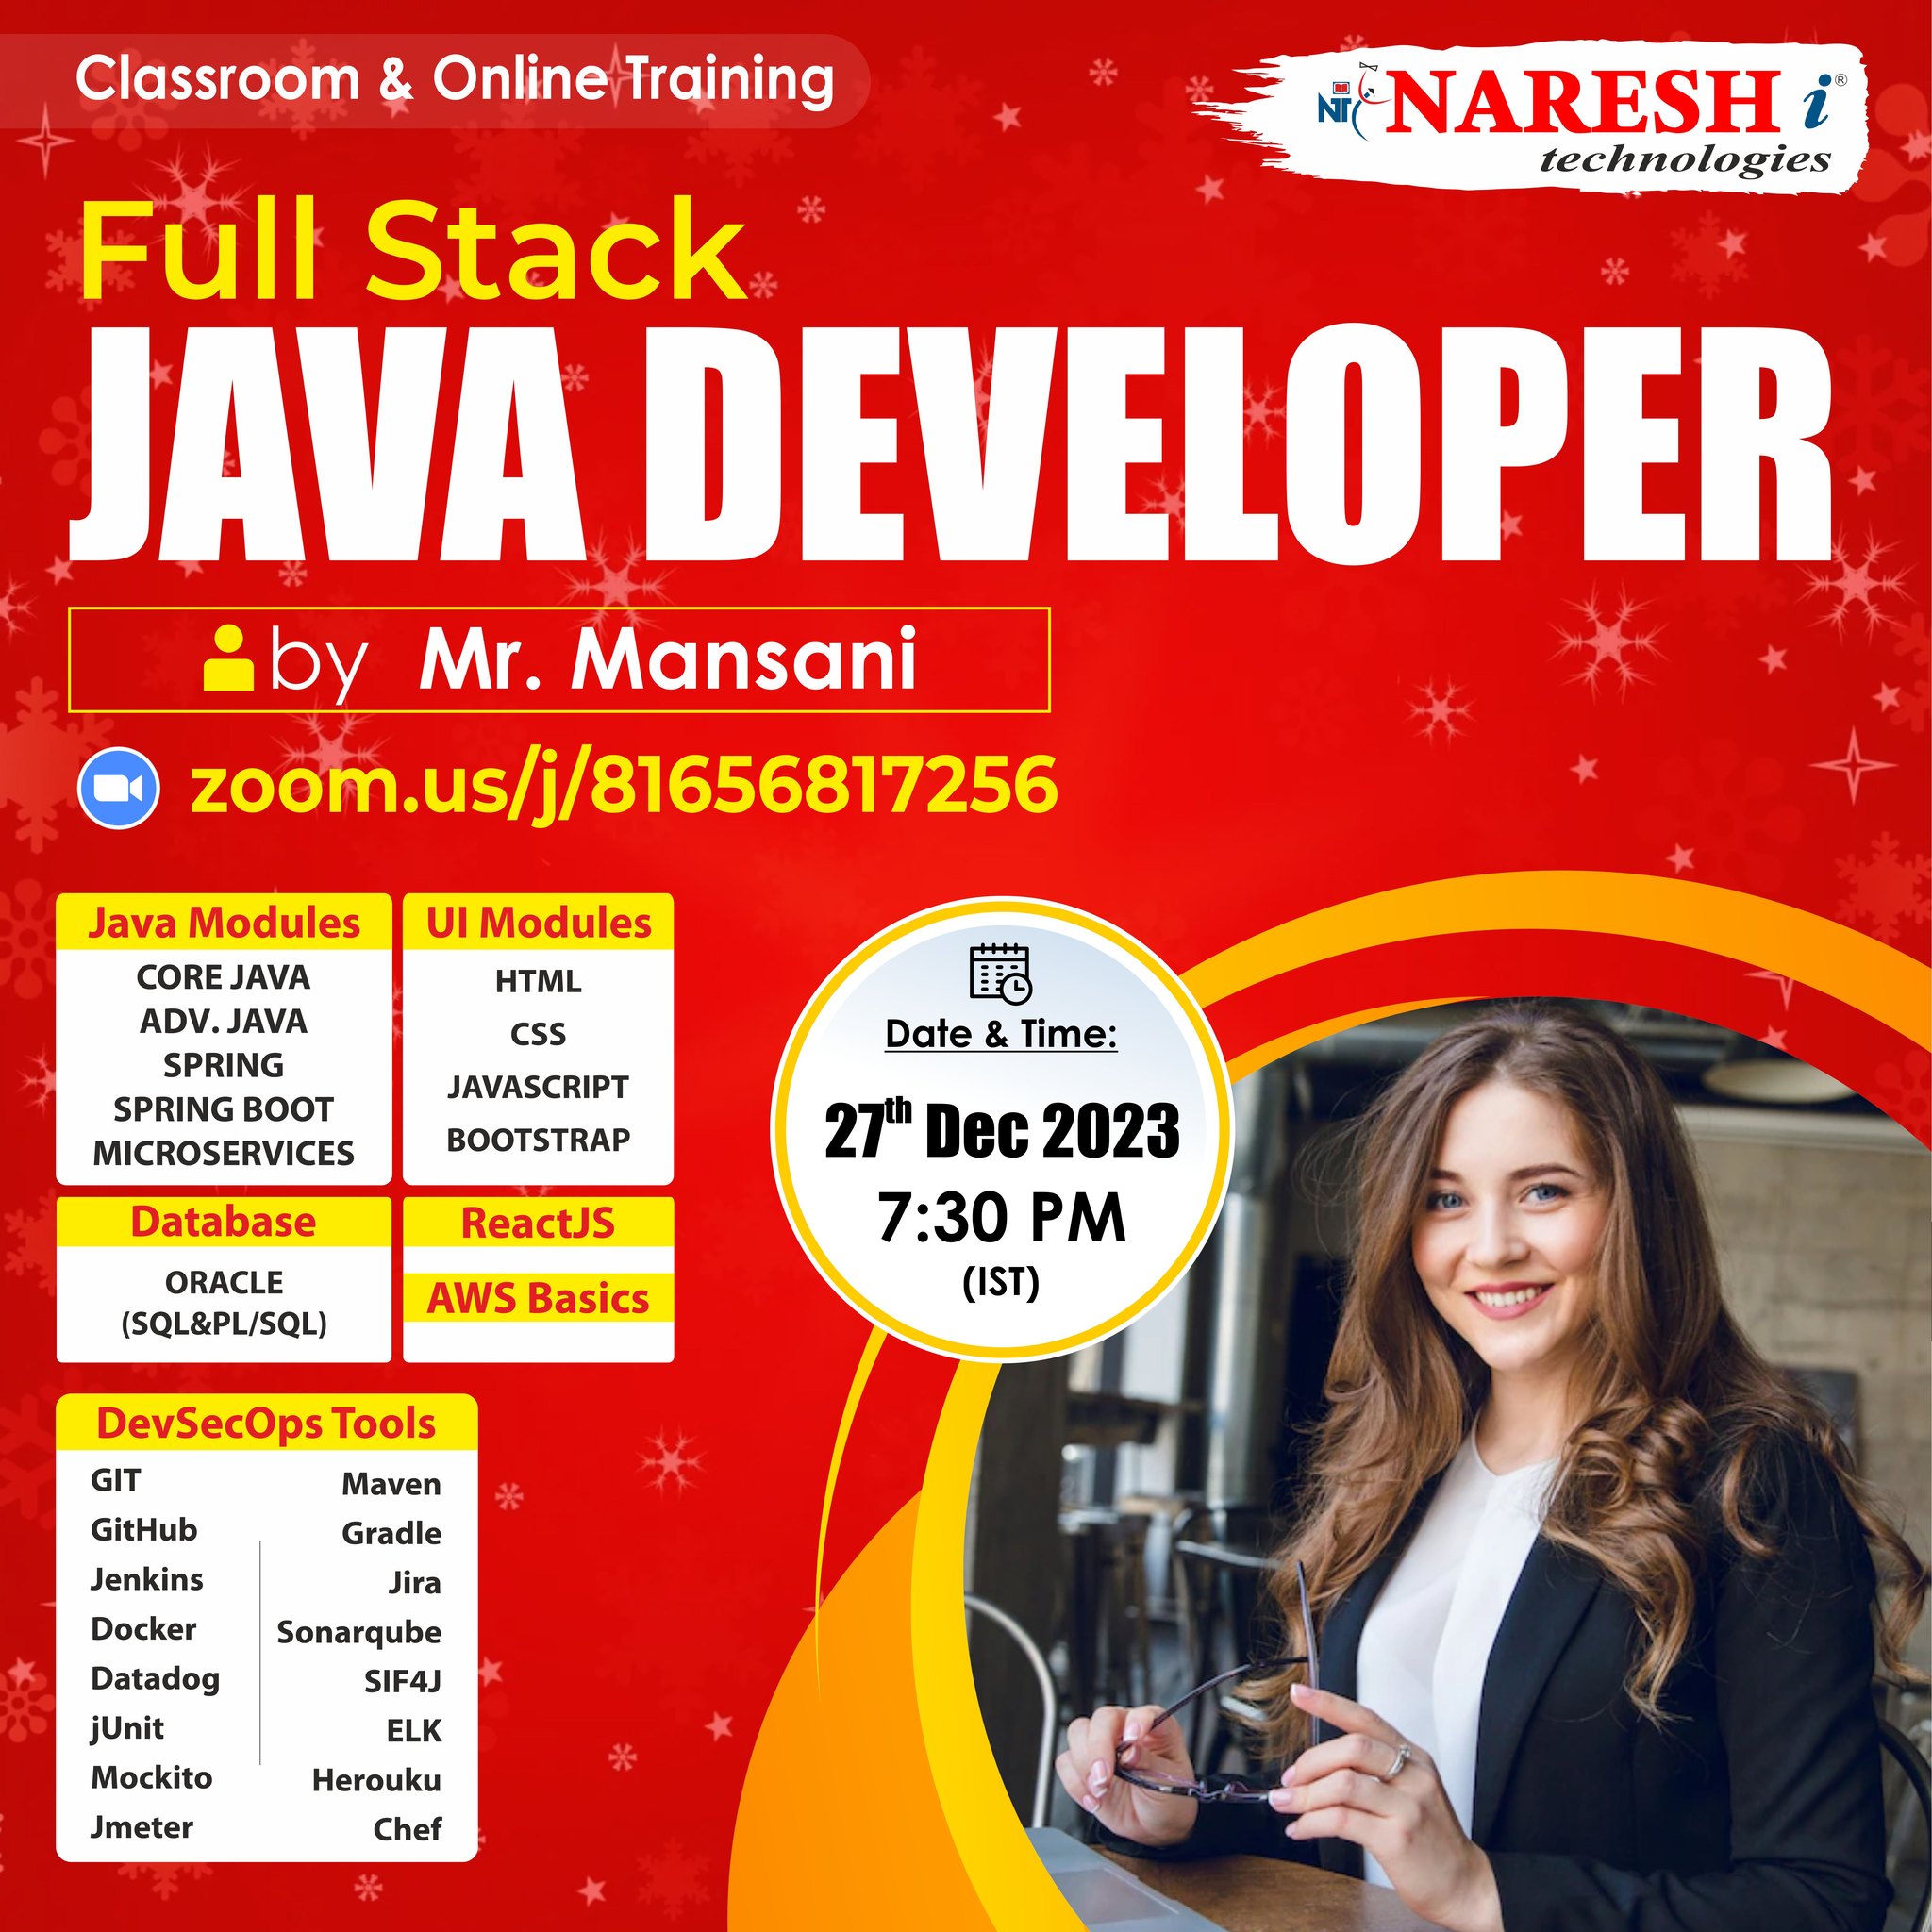 Free Demo On Full Stack Java Developer Course Training in NareshIT, Online Event